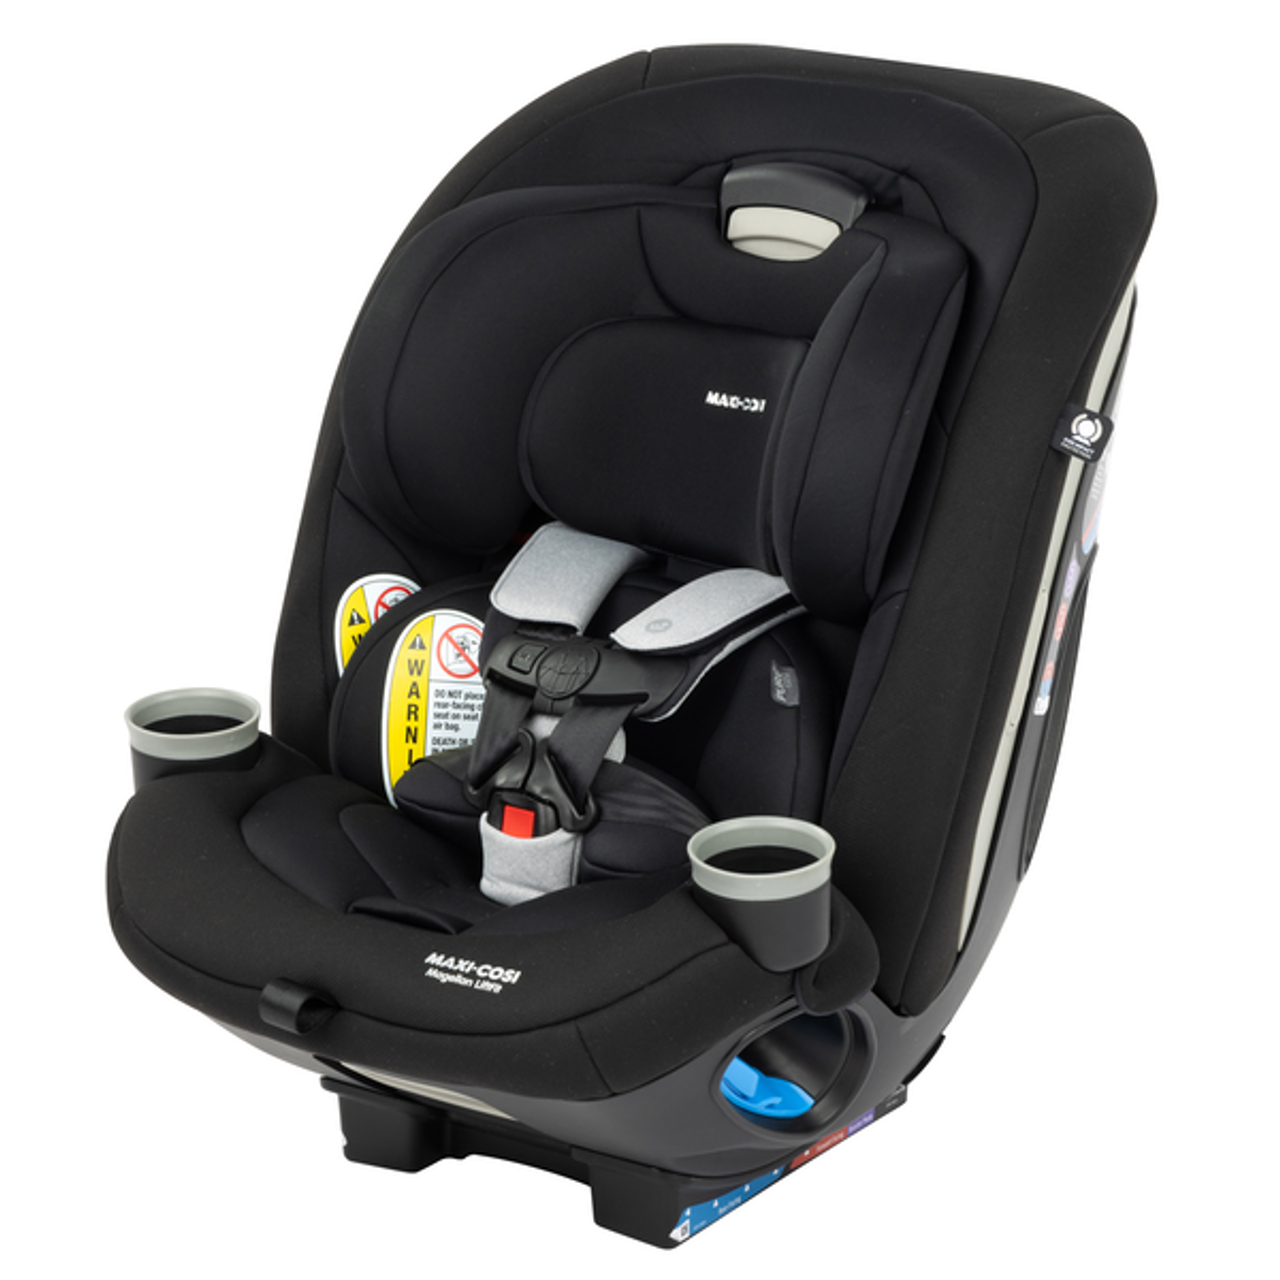 LiftFit All-in-One Convertible Seat | Kidsland